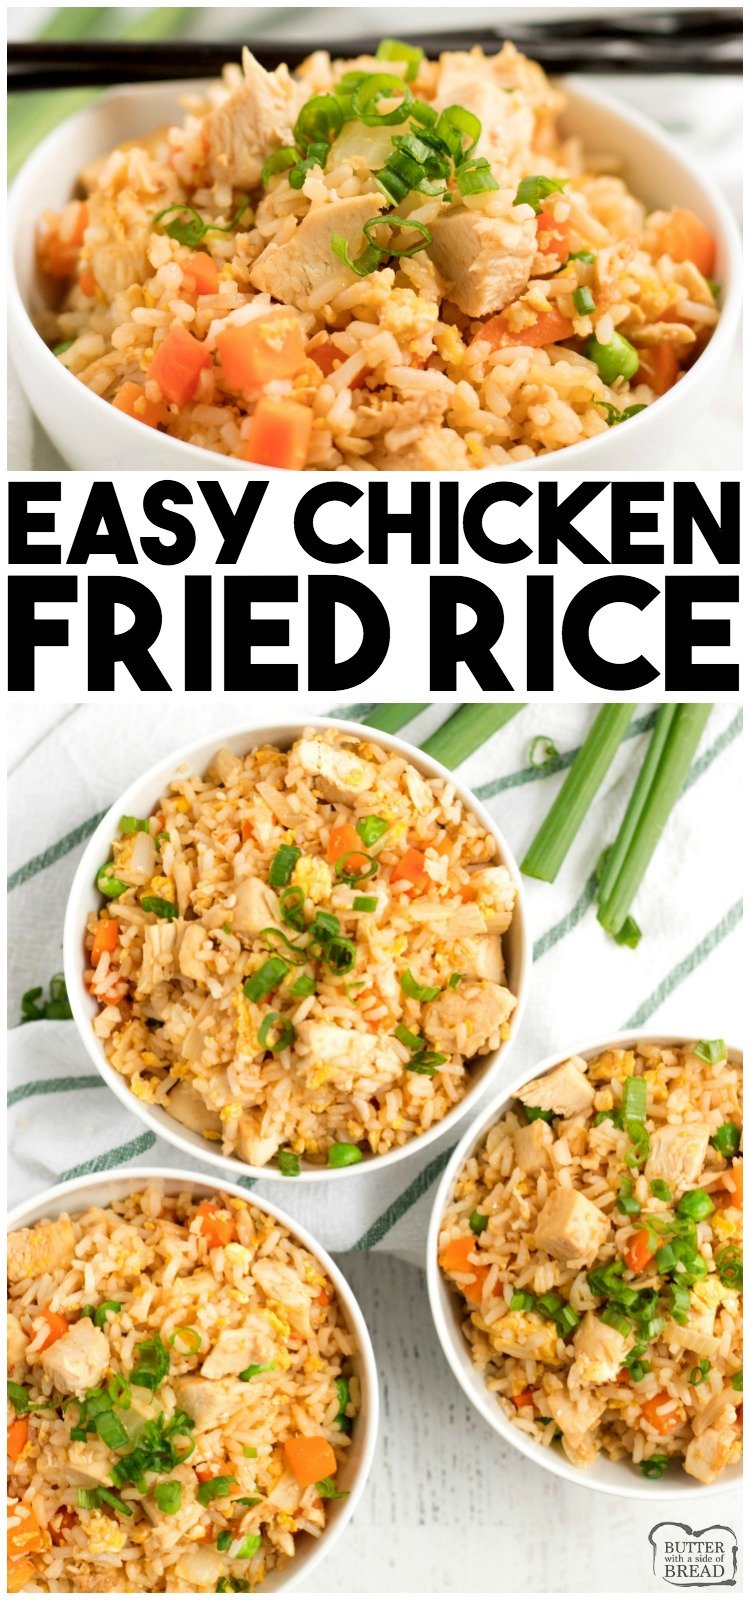 Chicken Fried Rice Recipe is a perfect weeknight dinner idea! Simple to make and trust me, homemade fried rice tastes SO much better.  Instructions for how to make fried rice using simple ingredients.